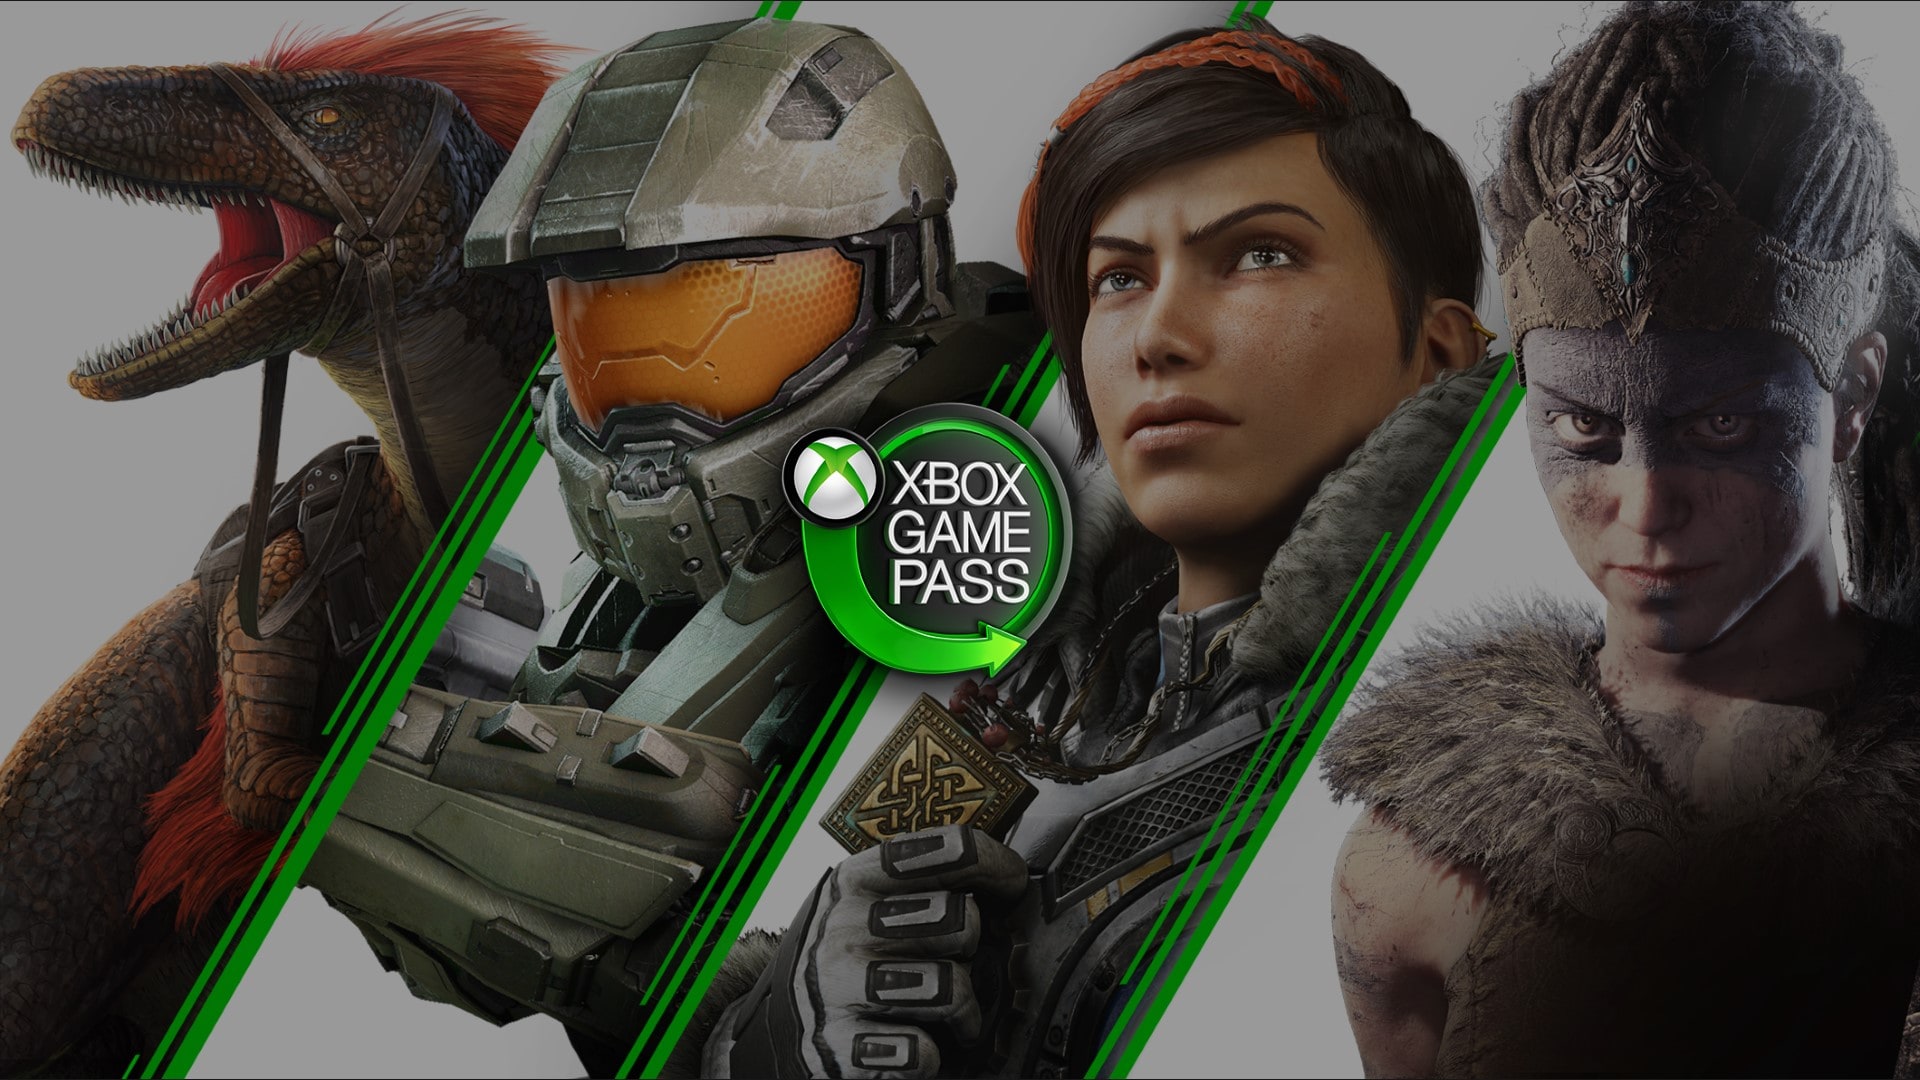 Microsoft announced the free trial version of PC Game Pass!